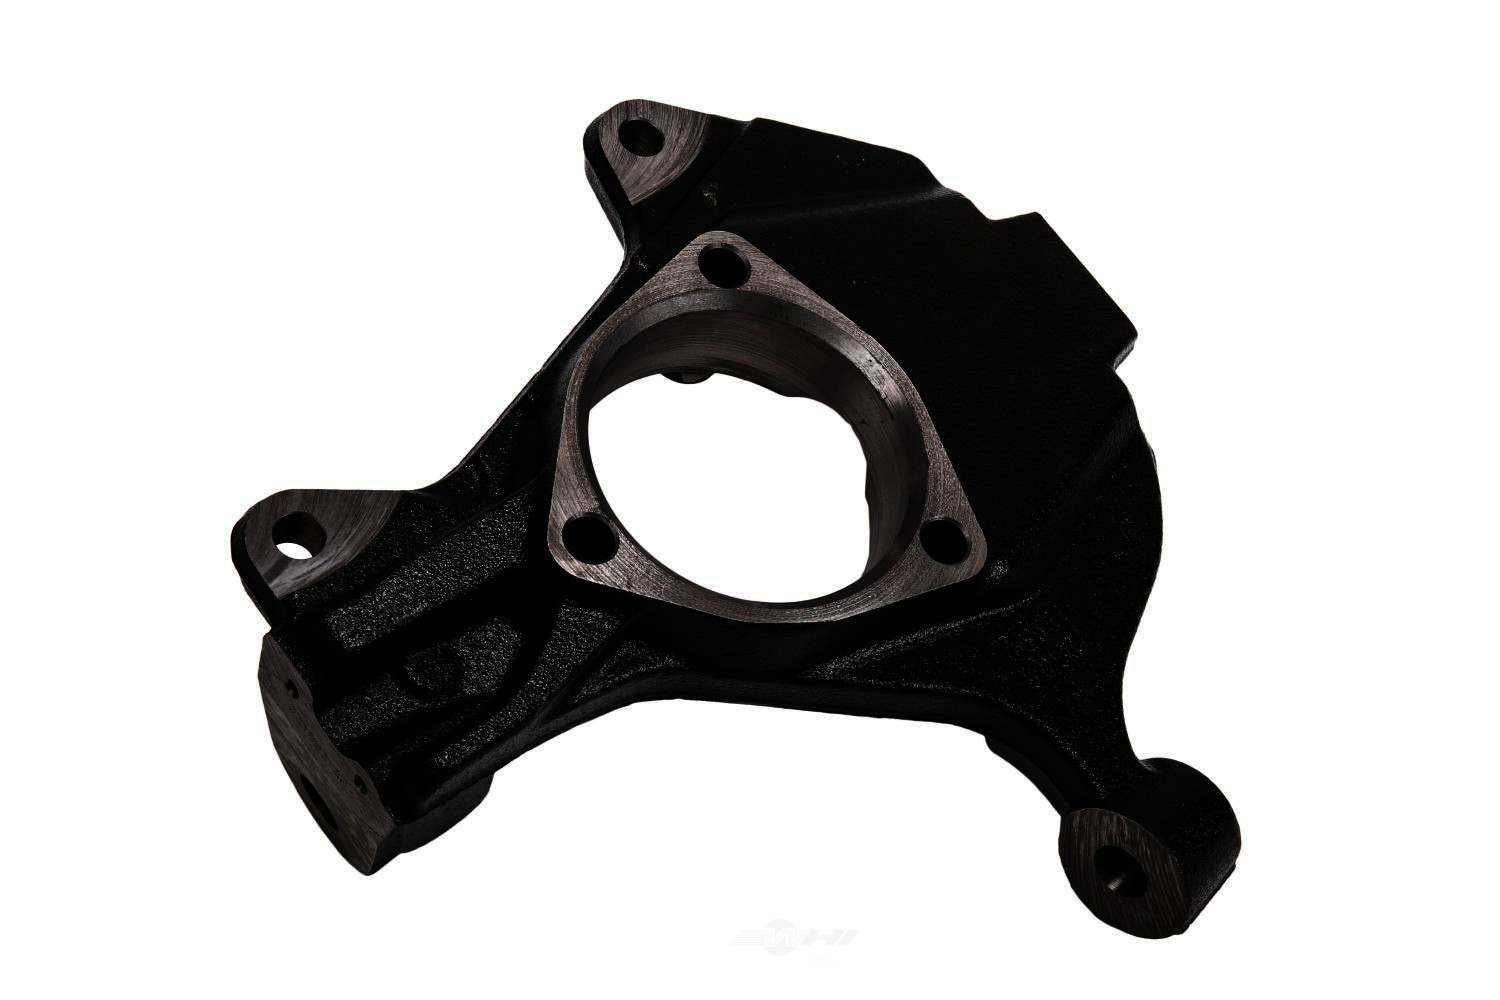 GM GENUINE PARTS - Steering Knuckle - GMP 23242659